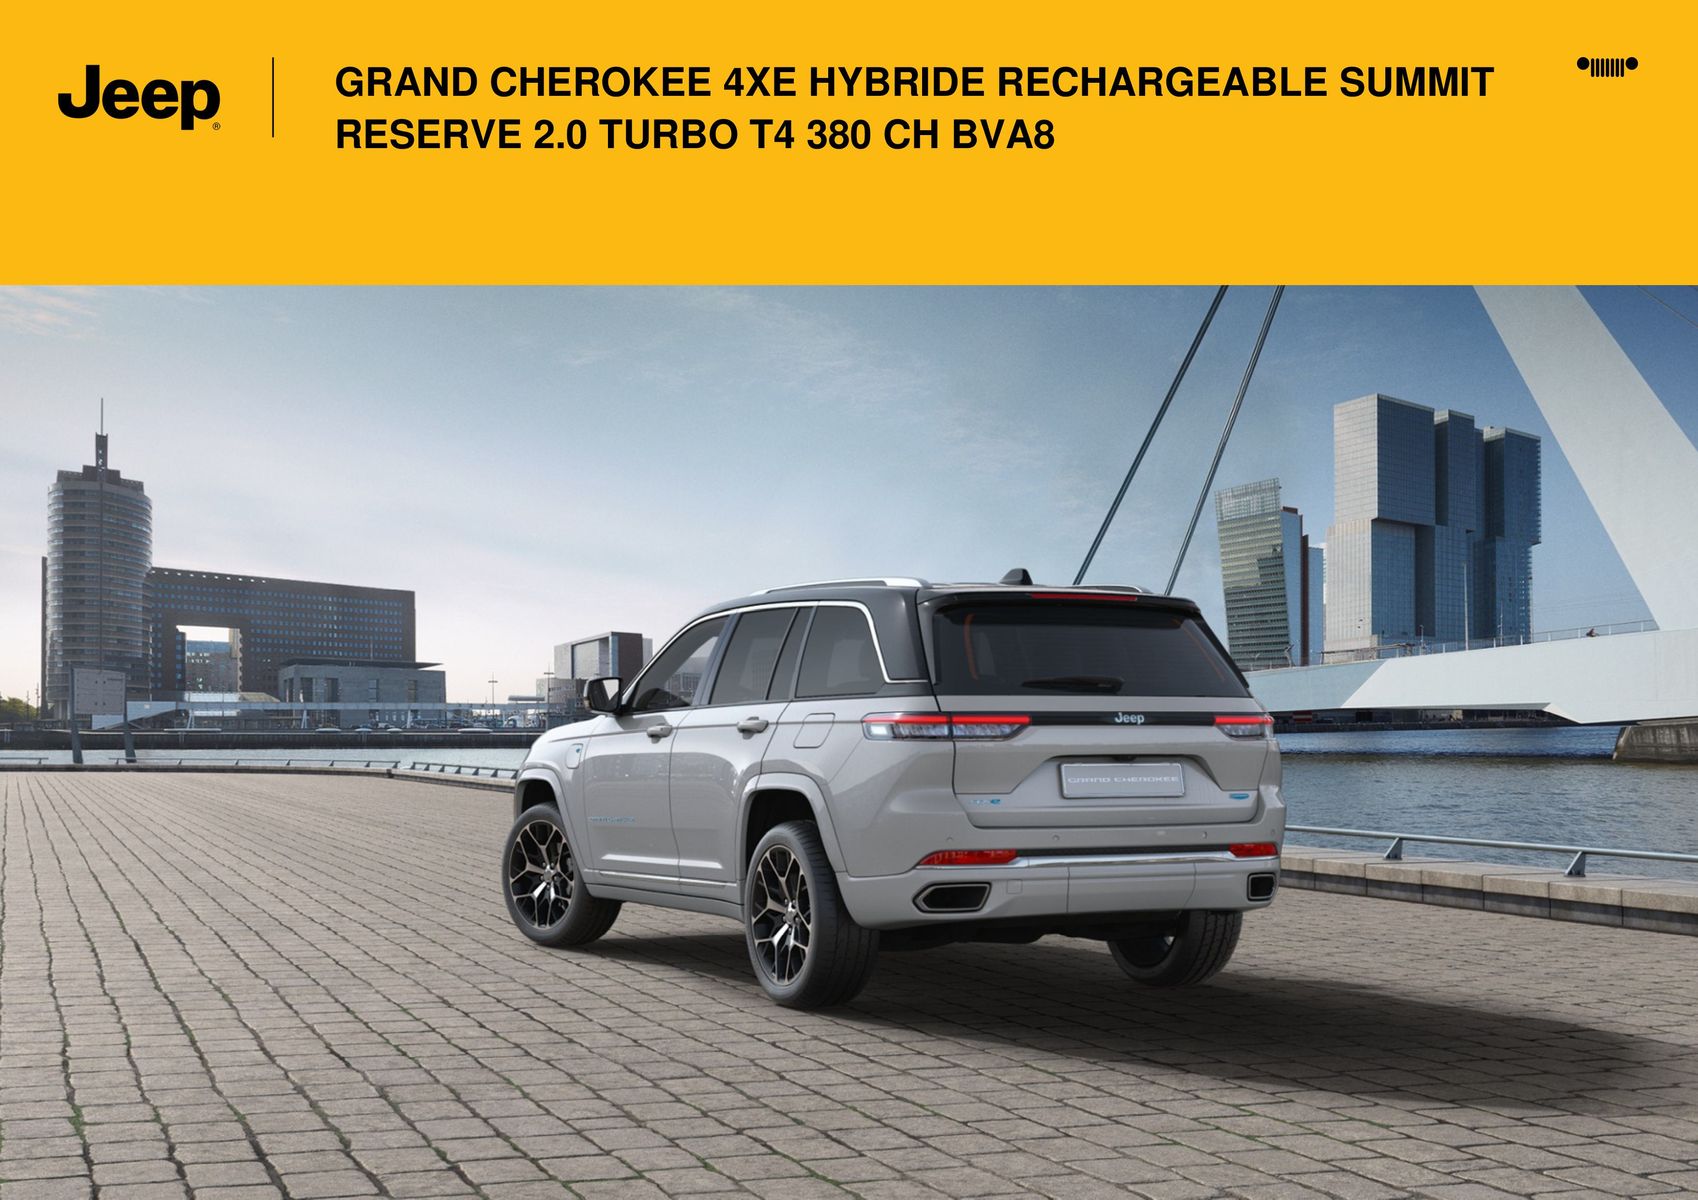 Catalogue GRAND CHEROKEE 4XE HYBRIDE RECHARGEABLE SUMMIT RESERVE 2.0 TURBO T4 380 CH BVA8, page 00014